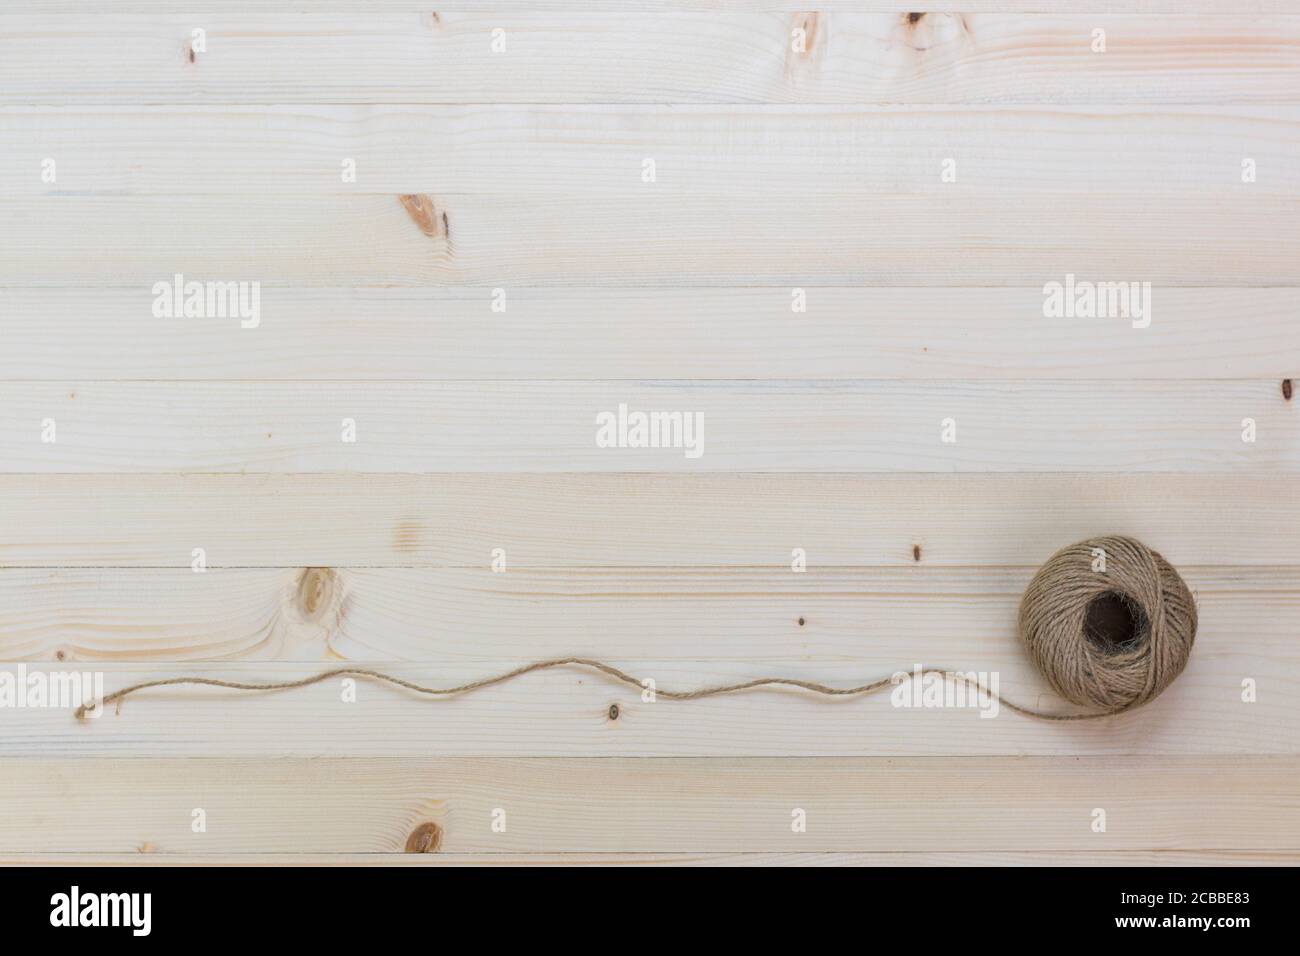 Hemp rope roll placed on a pine floor background. Stock Photo